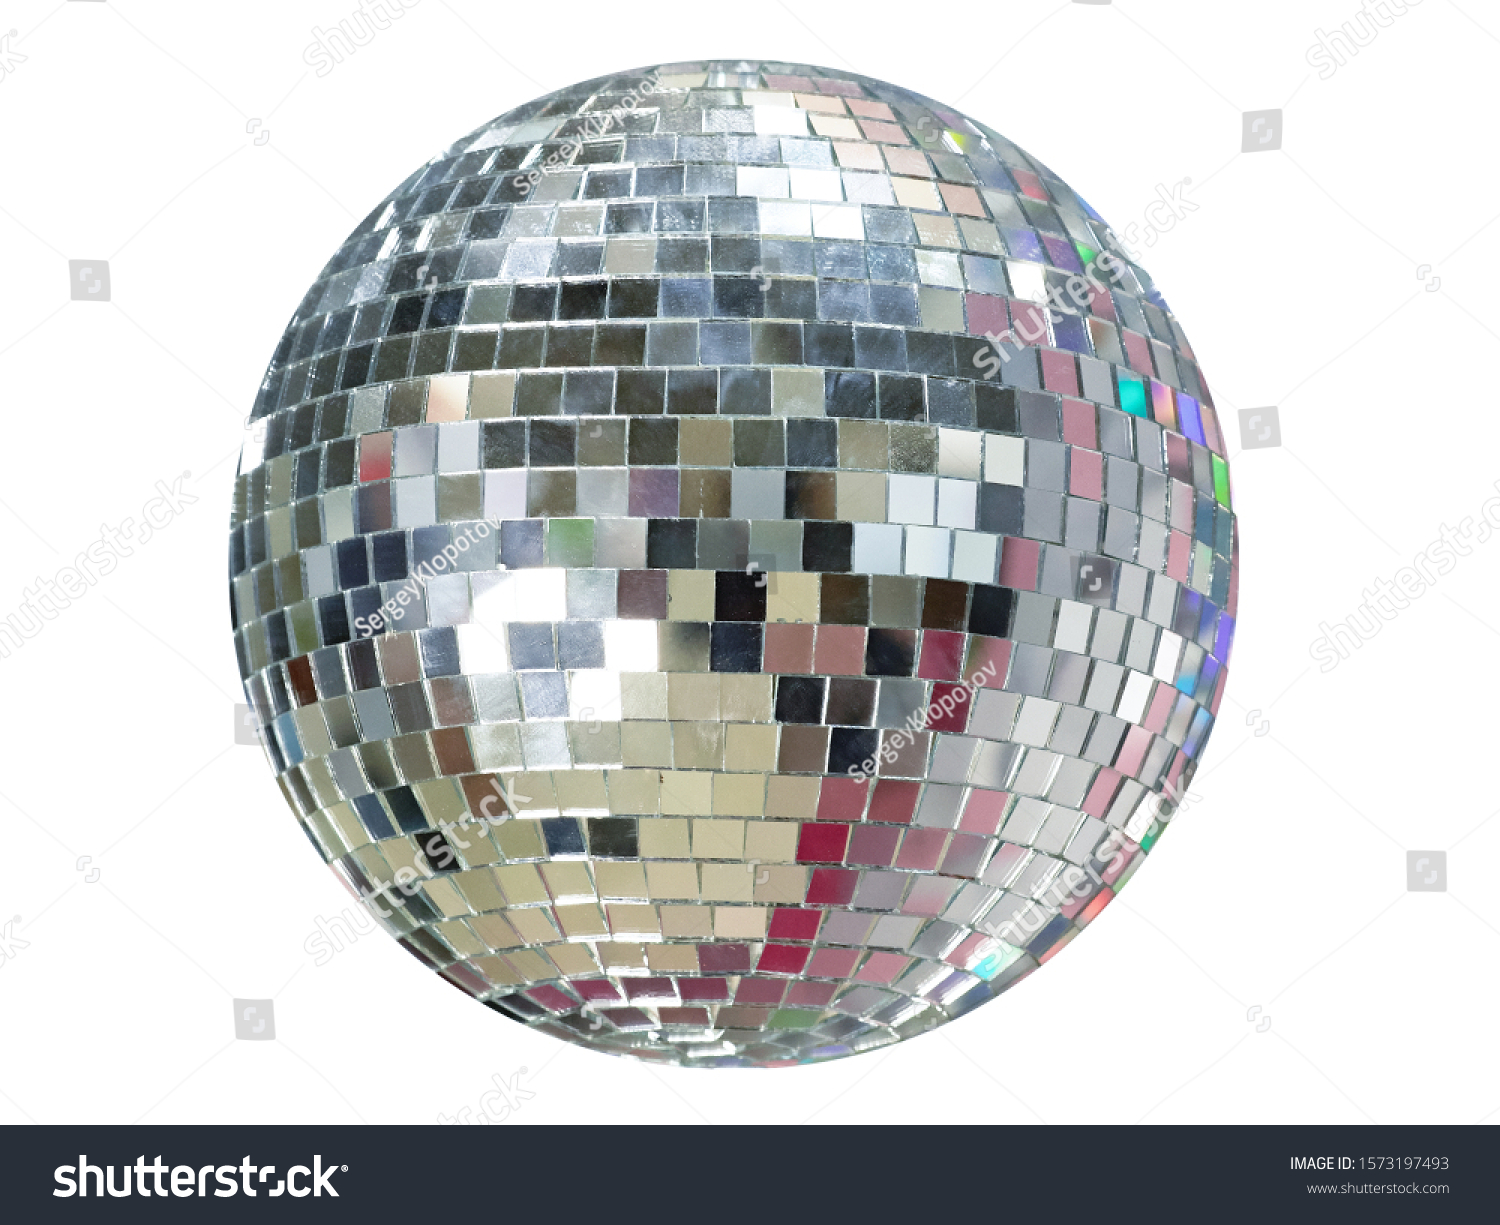 Large mirror ball with multi-colored reflections isolated on a white background. #1573197493